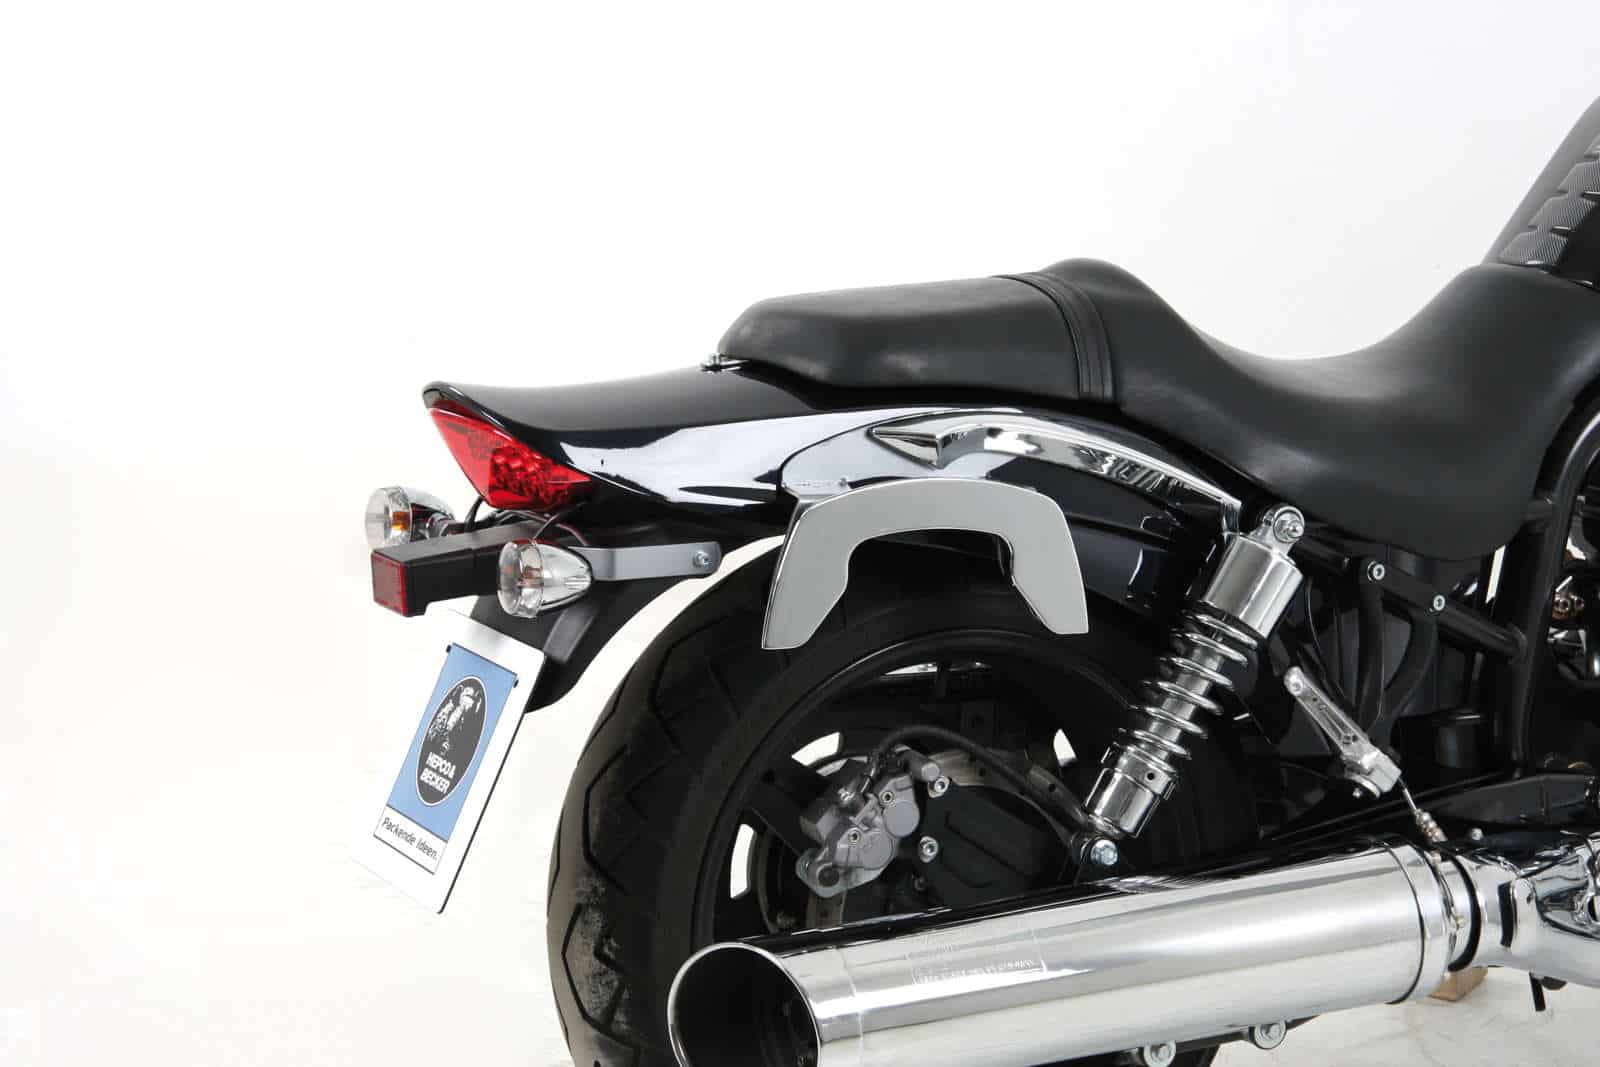 C-Bow sidecarrier for Hyosung GV 650 i Aquilia (2006-2011)